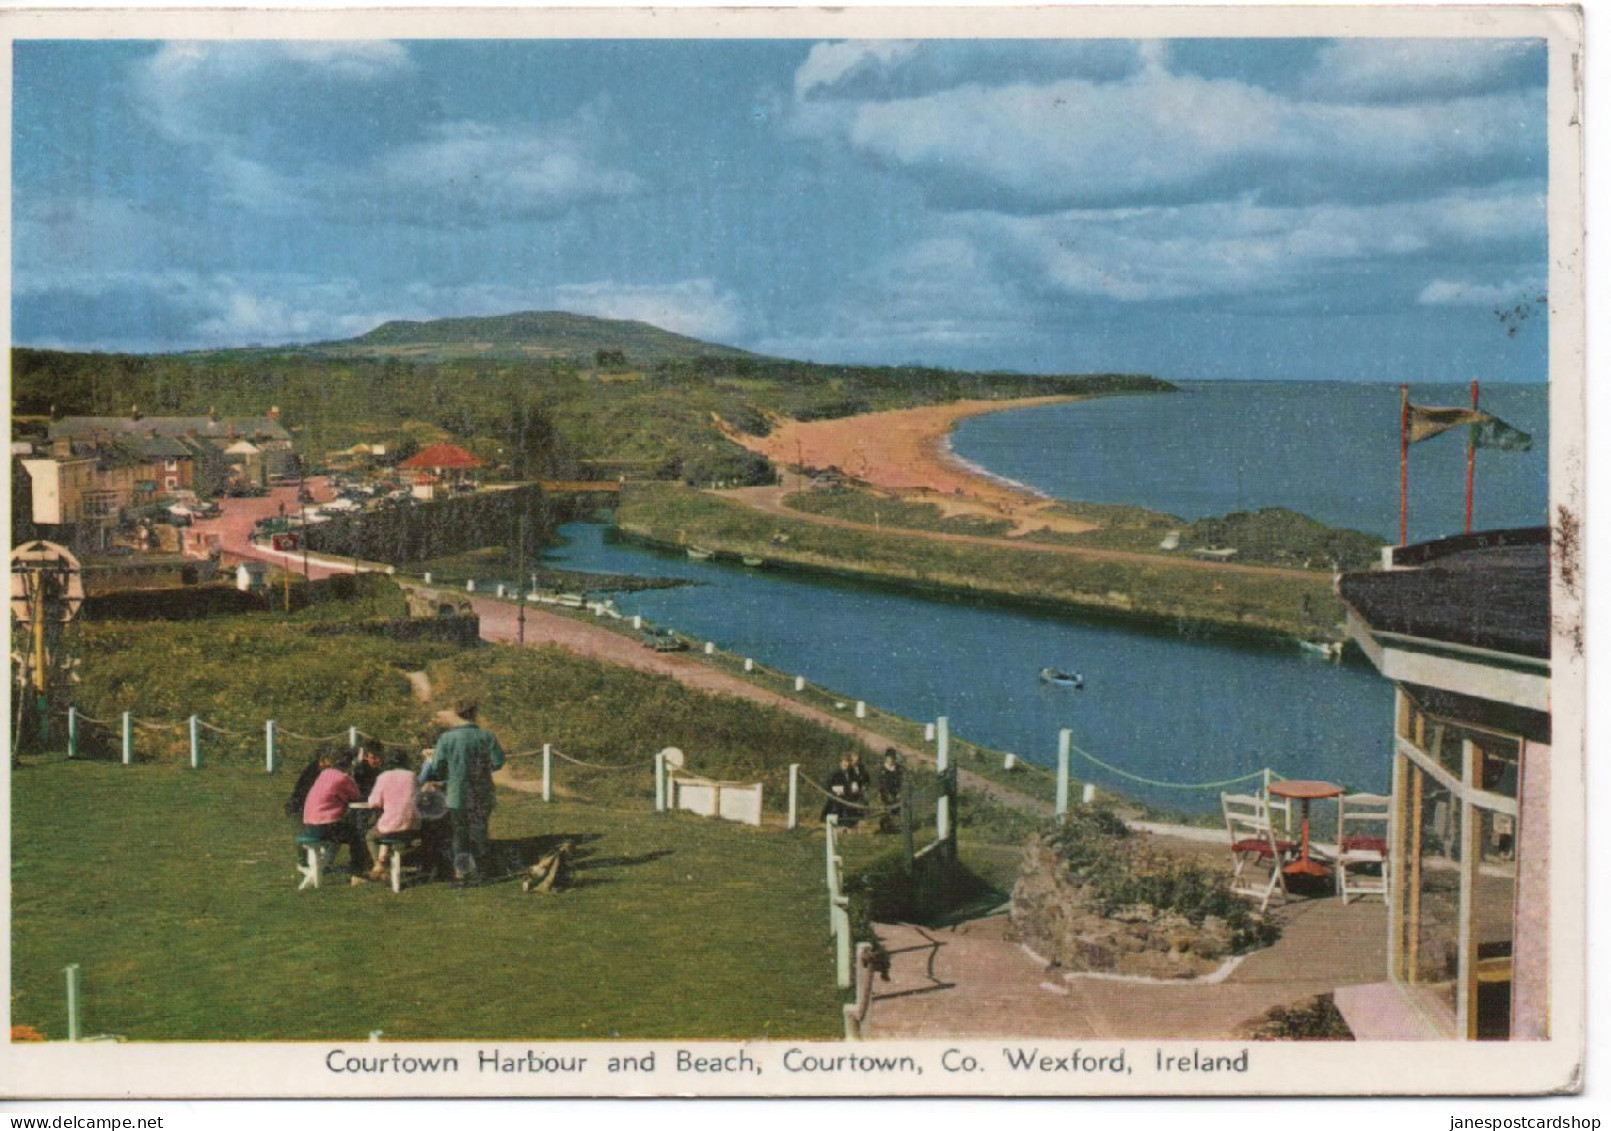 COURTOWN HARBOUR & BEACH - CO. WEXFORD - IRELAND - WITH FEARNA - CO. LEITRIM POSTMARK - 1967 - Wexford